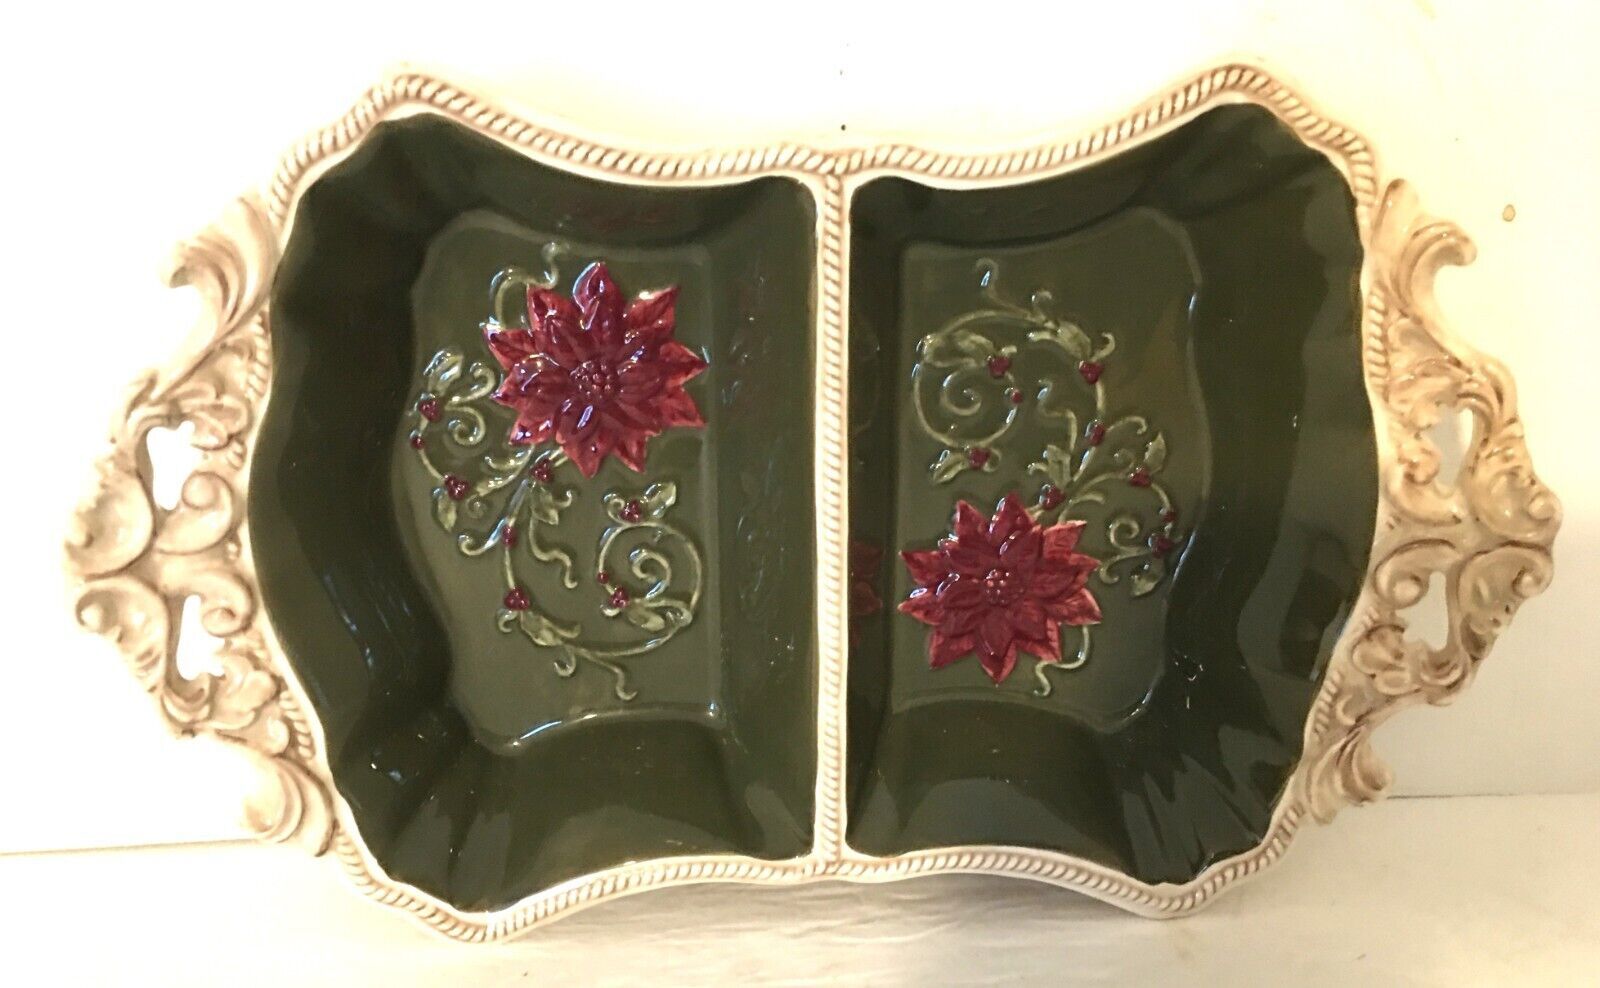 Primary image for Grasslands Road Christmas Serving Dish Divided, Beige Ceramic w/Poinsettias 6x11